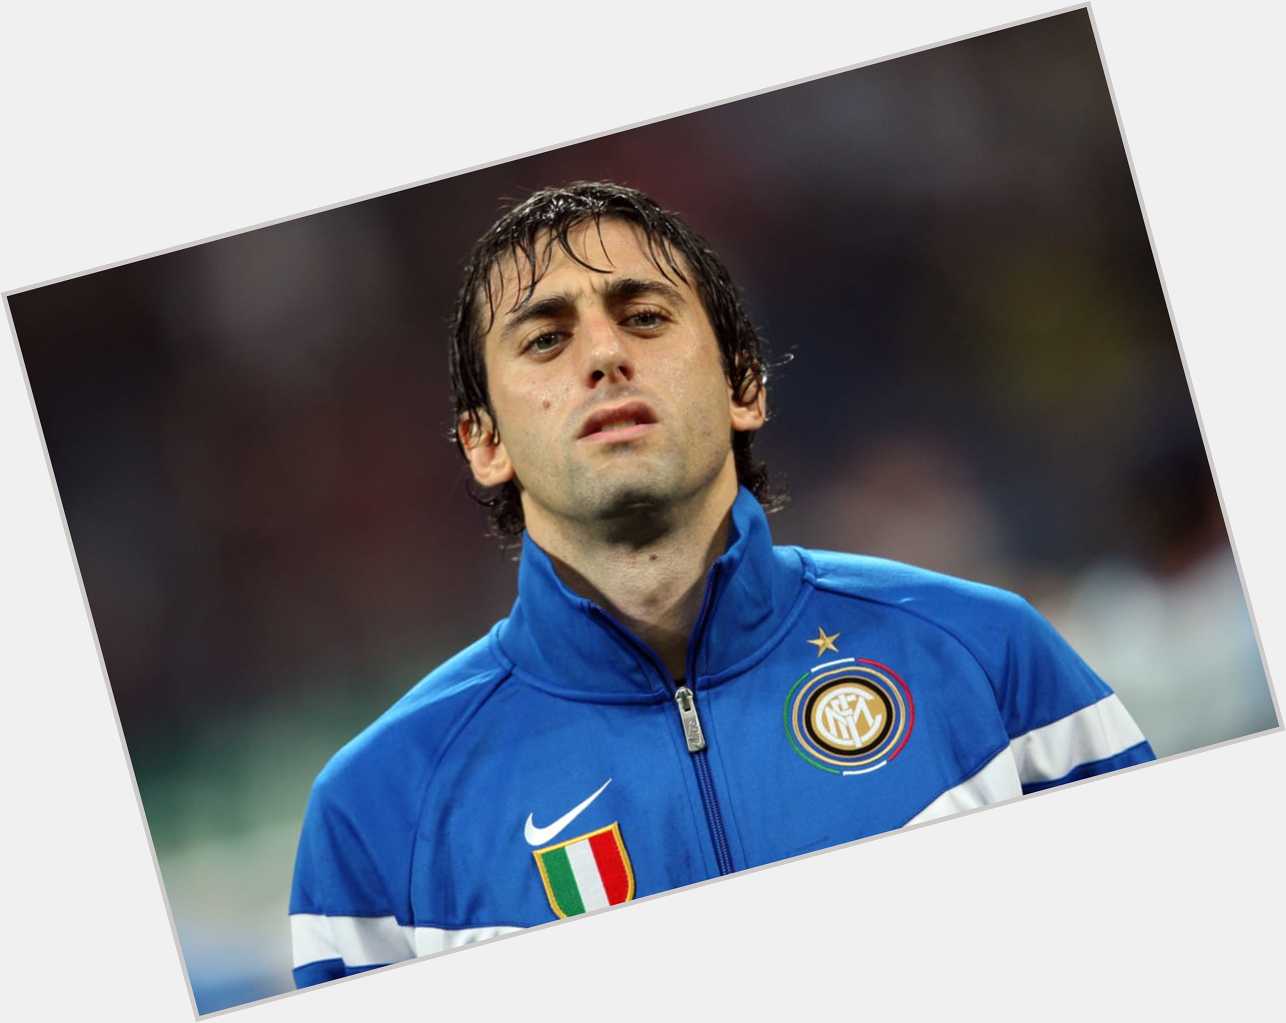 Http://fanpagepress.net/m/D/Diego Milito Dating 3